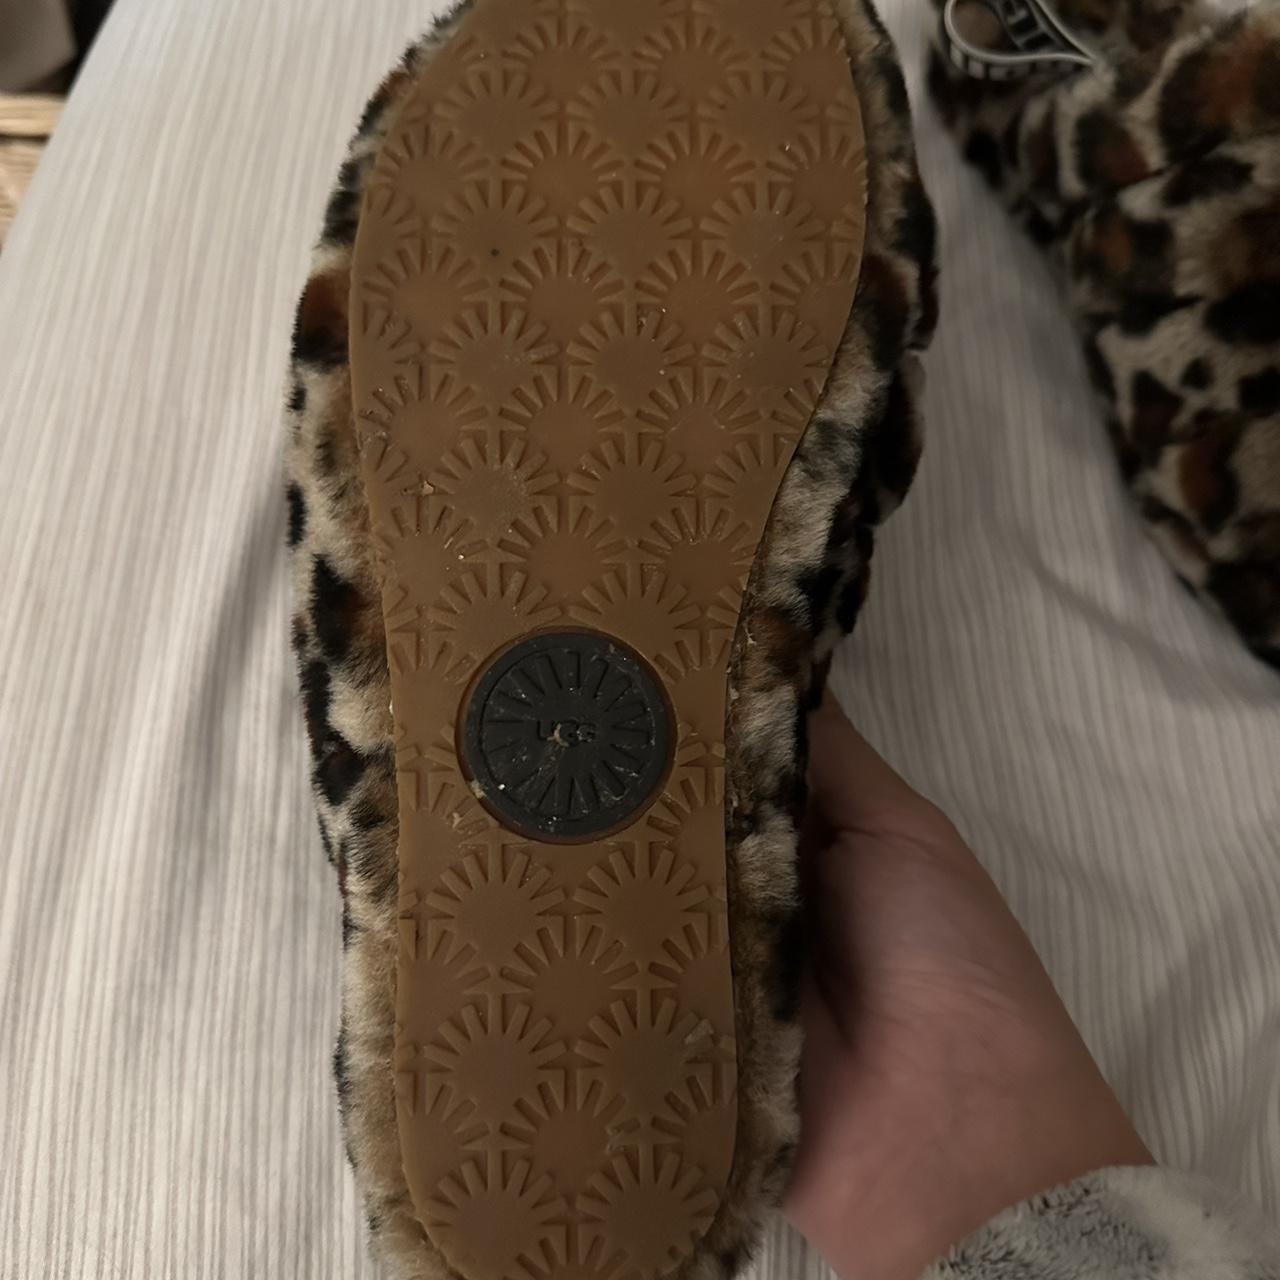 UGG Women's Tan and Black Slippers (4)